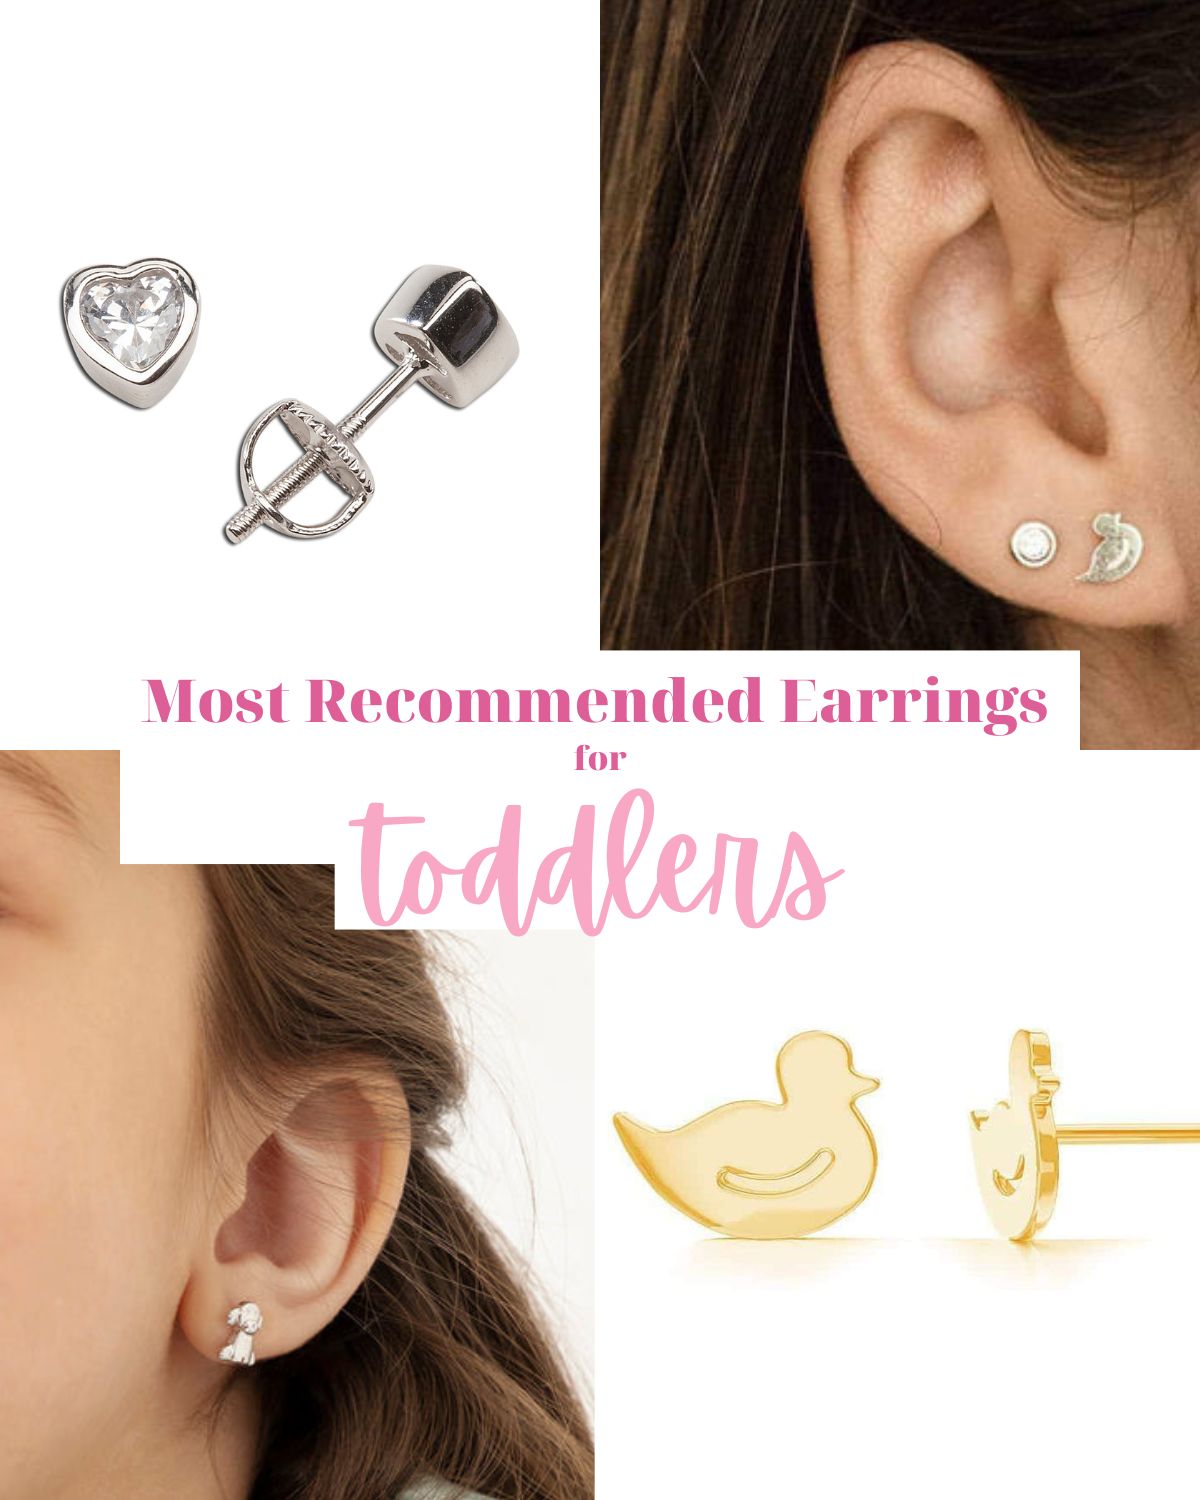 Four pairs of earrings made of silver and gold that are safest for a toddler